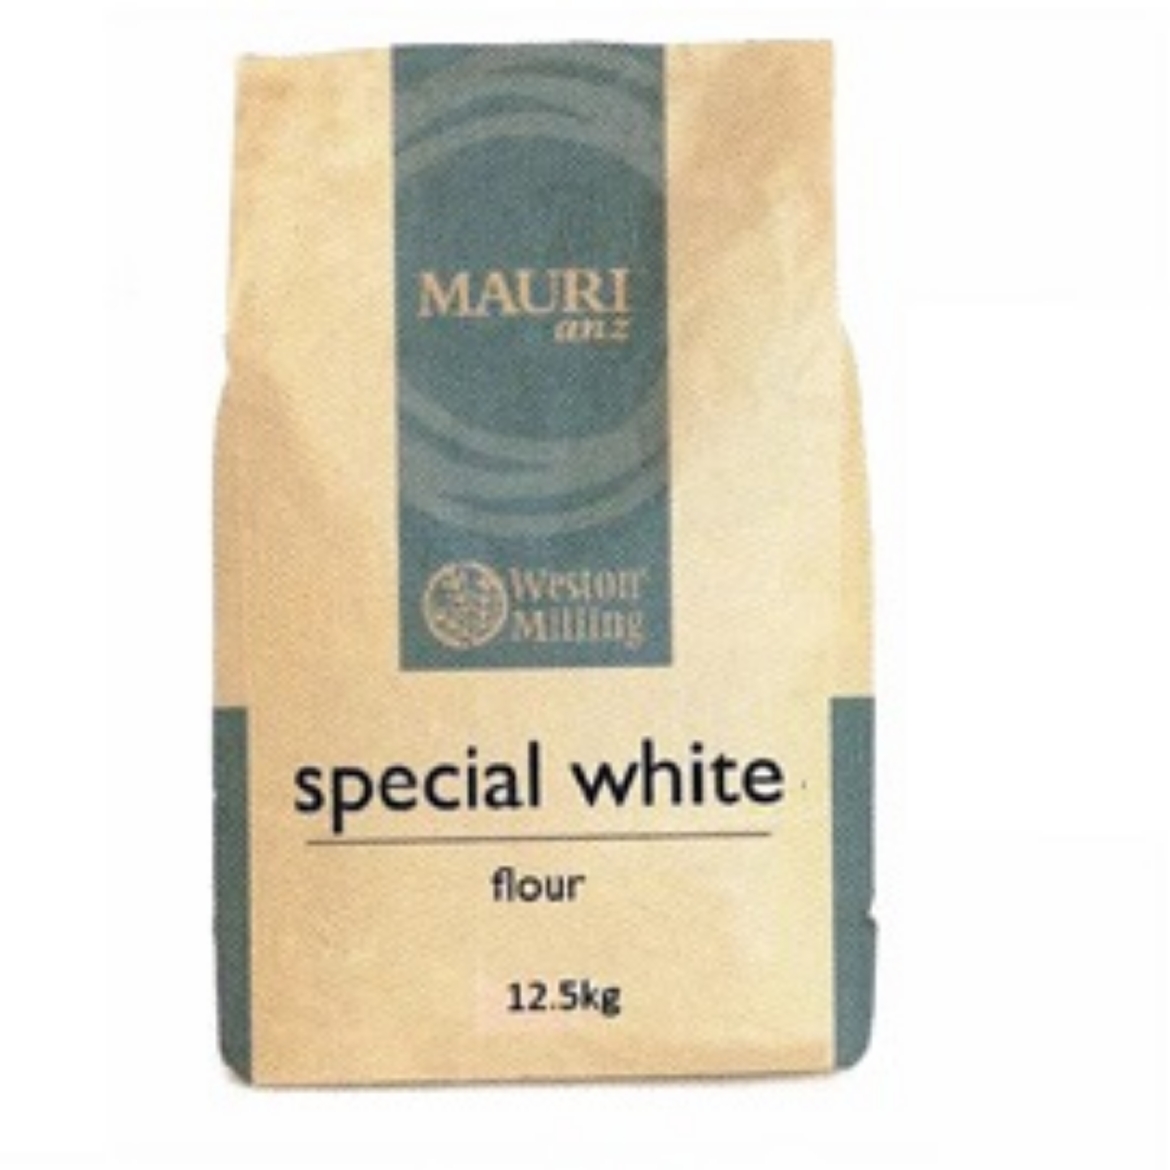 Picture of 12.5KG MAURI SPECIAL WHITE FLOUR